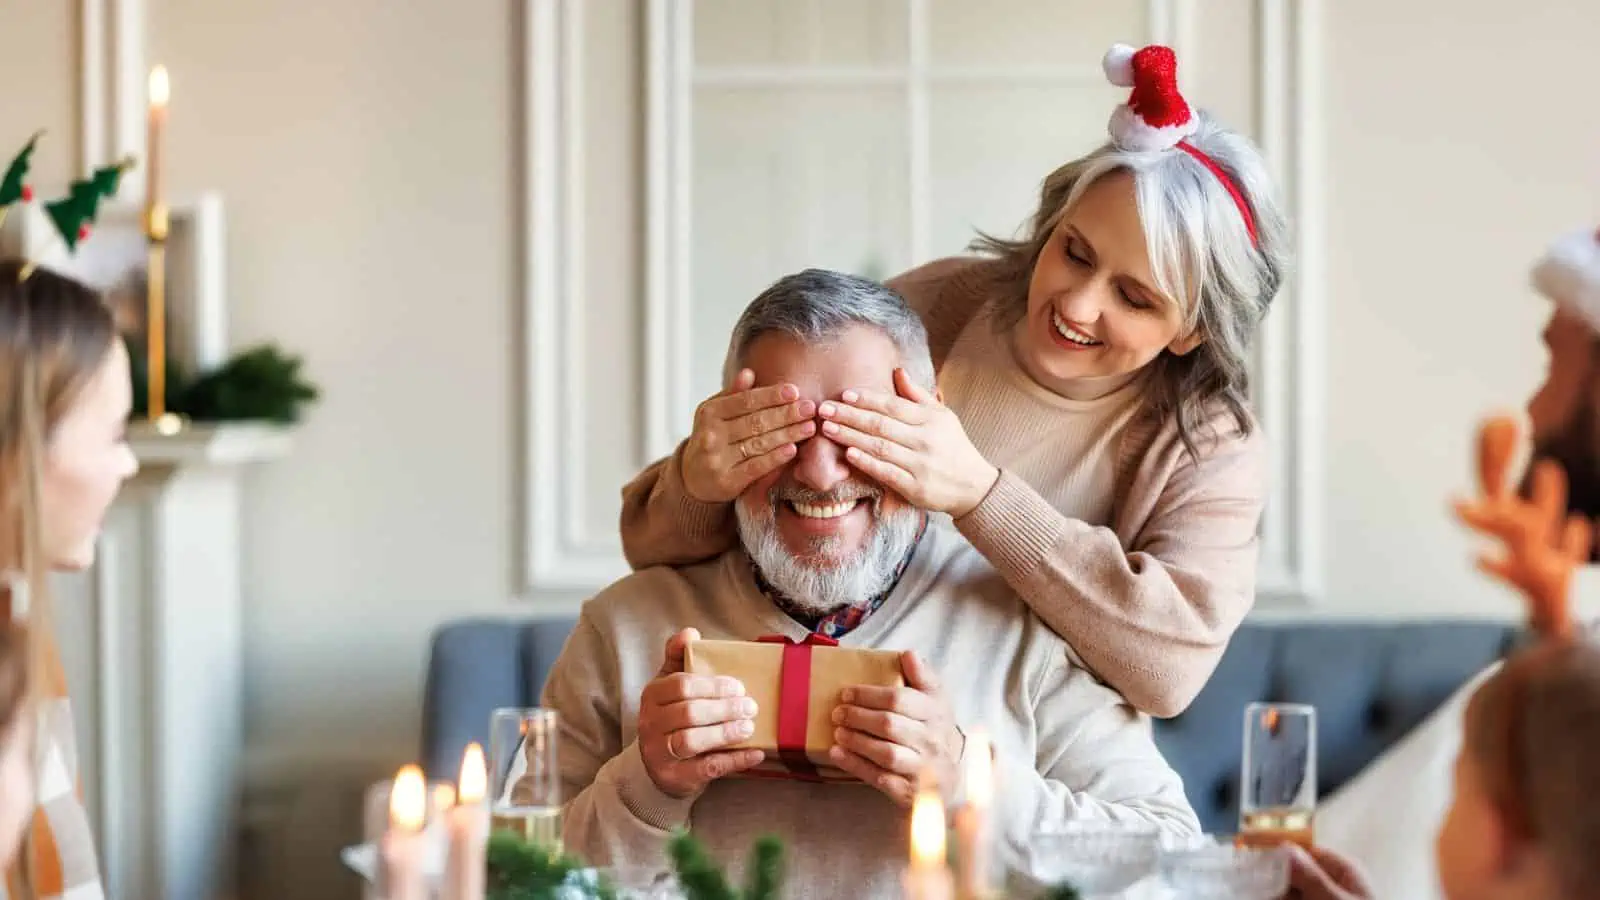 Woman covering man's eyes holding Christmas gift (1)